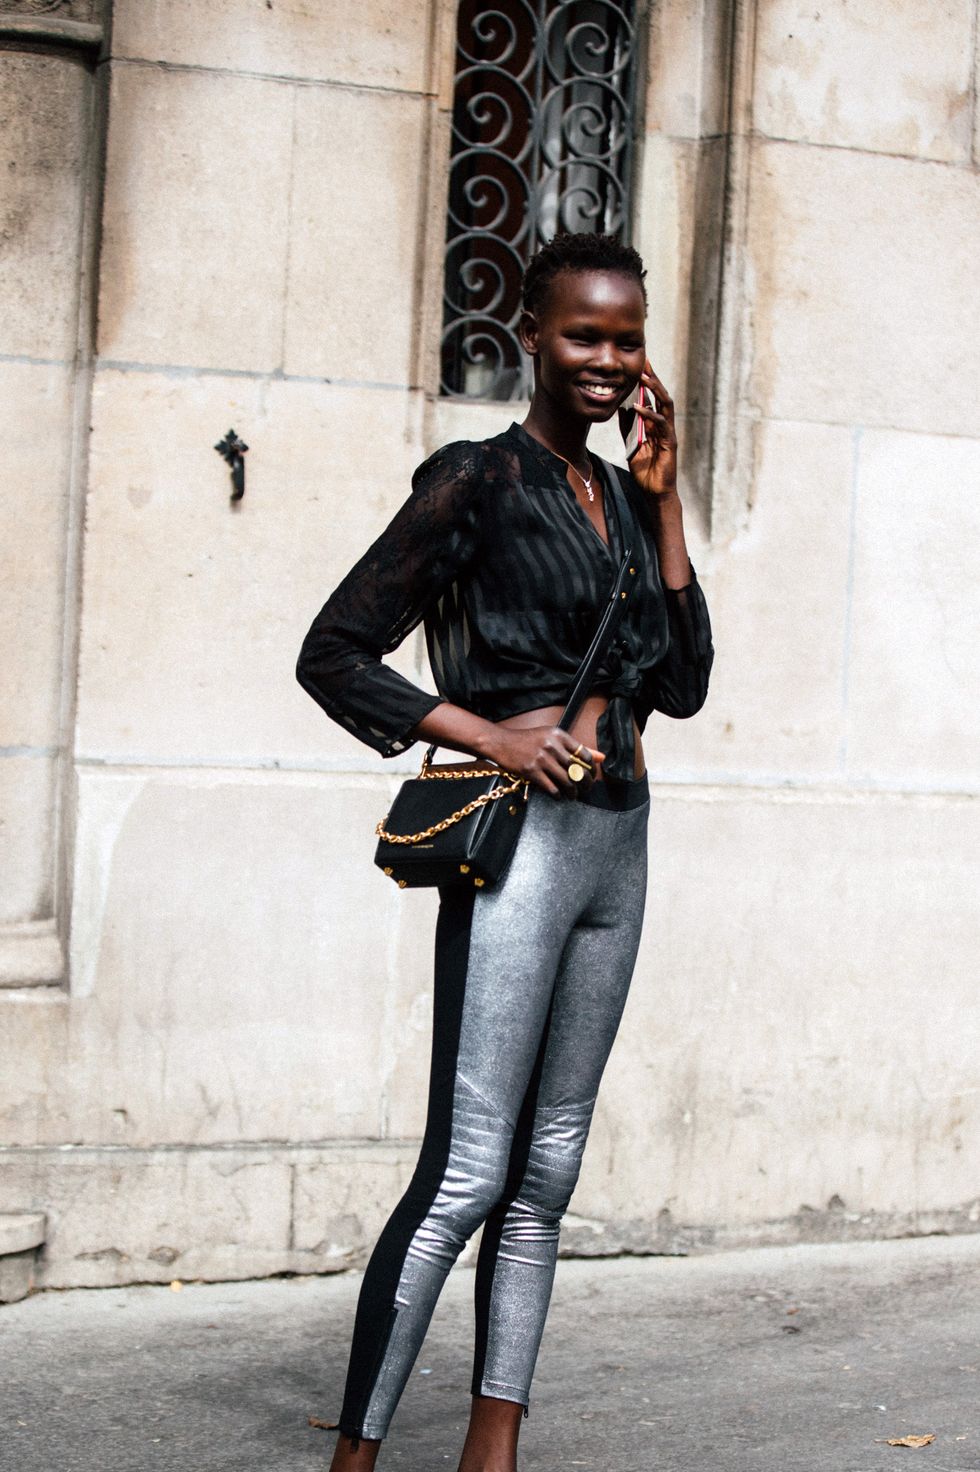 19 Leggings Outfits That Prove You Can Wear Them For Any Occasion